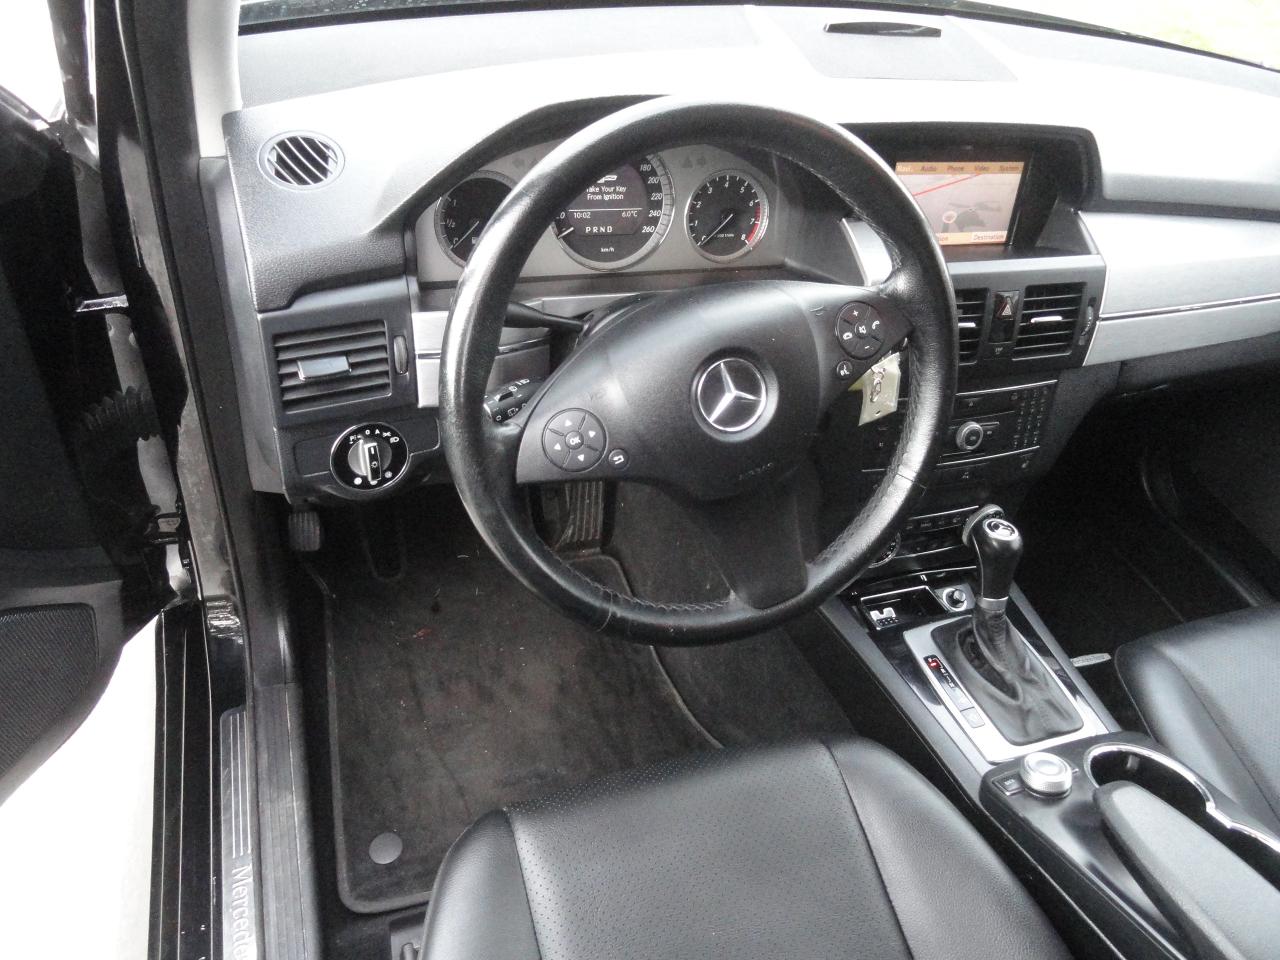 2010 Mercedes-Benz GLK350 4 MATIC -  DOC FEE ONLY $195.00 - Photo #13